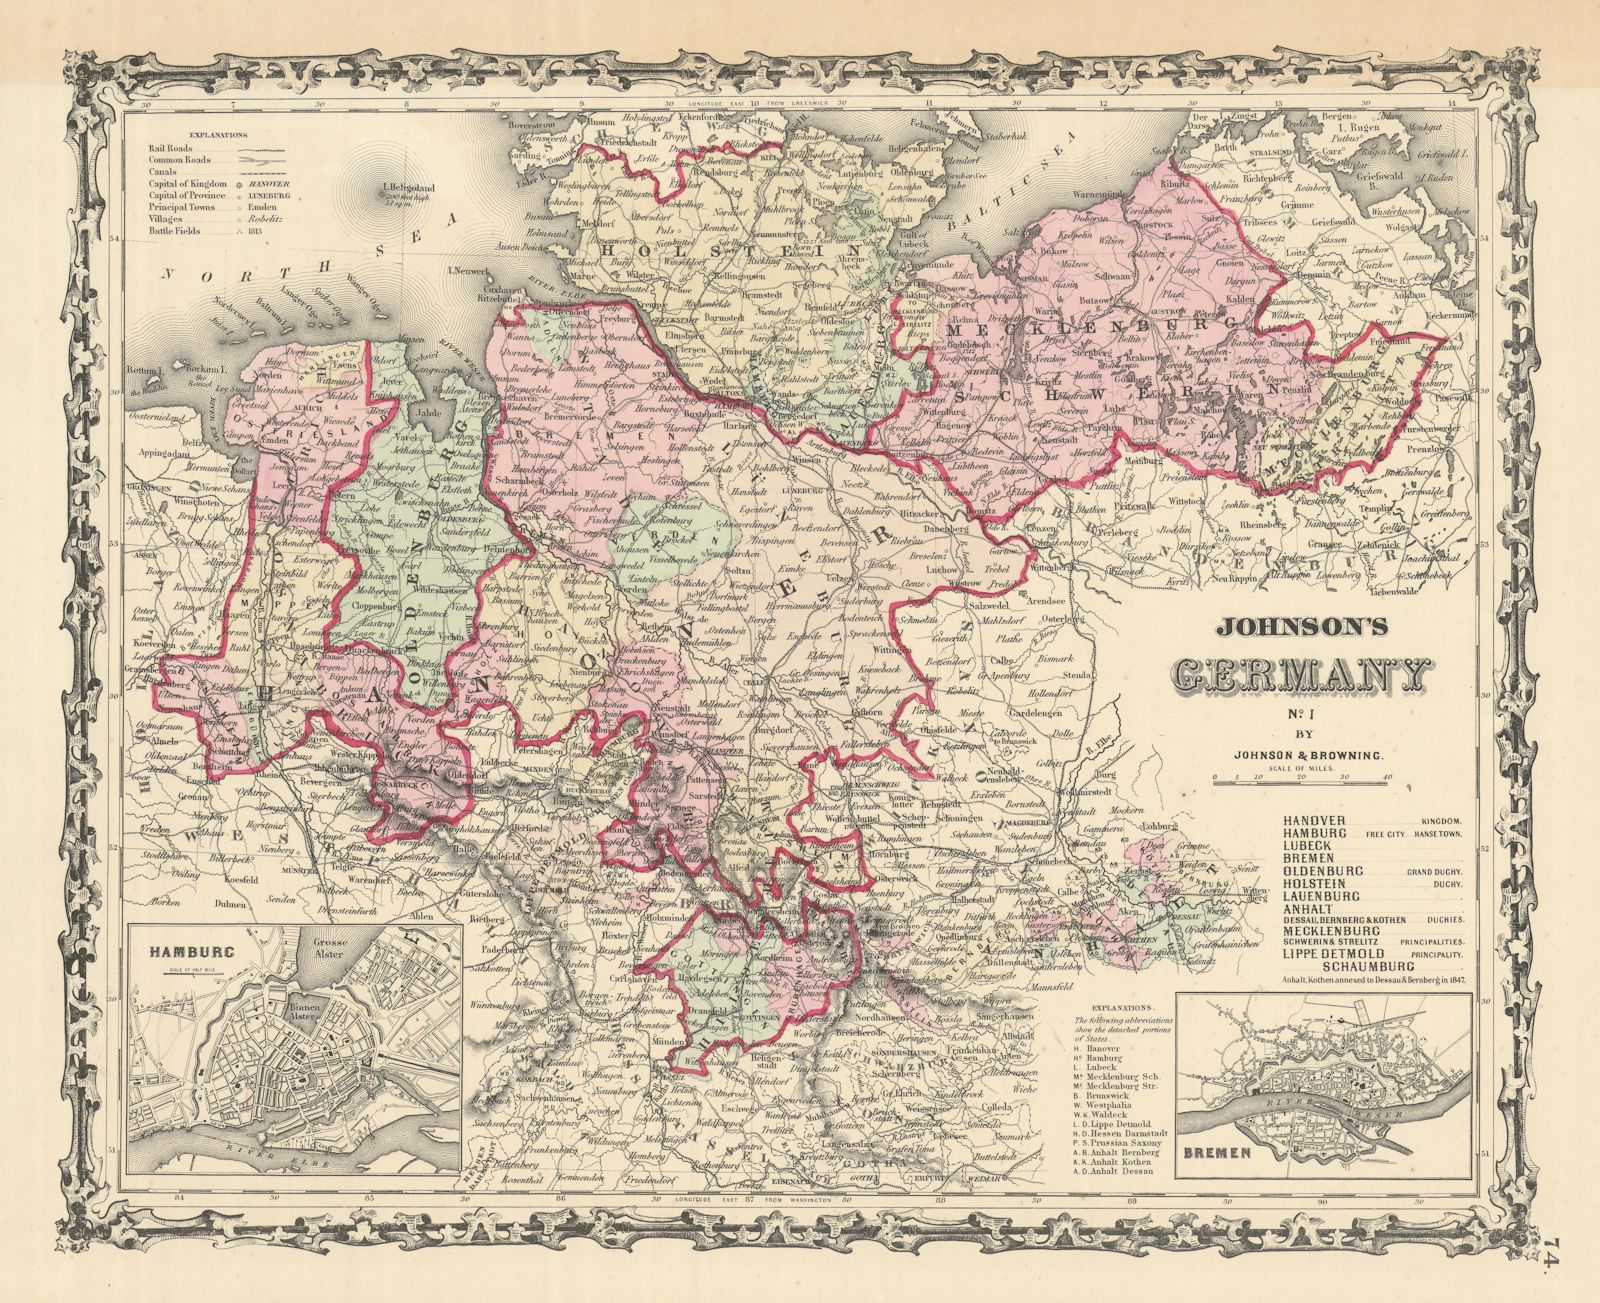 Johnson's Germany No. 1. Northern Germany 1861 old antique map plan chart